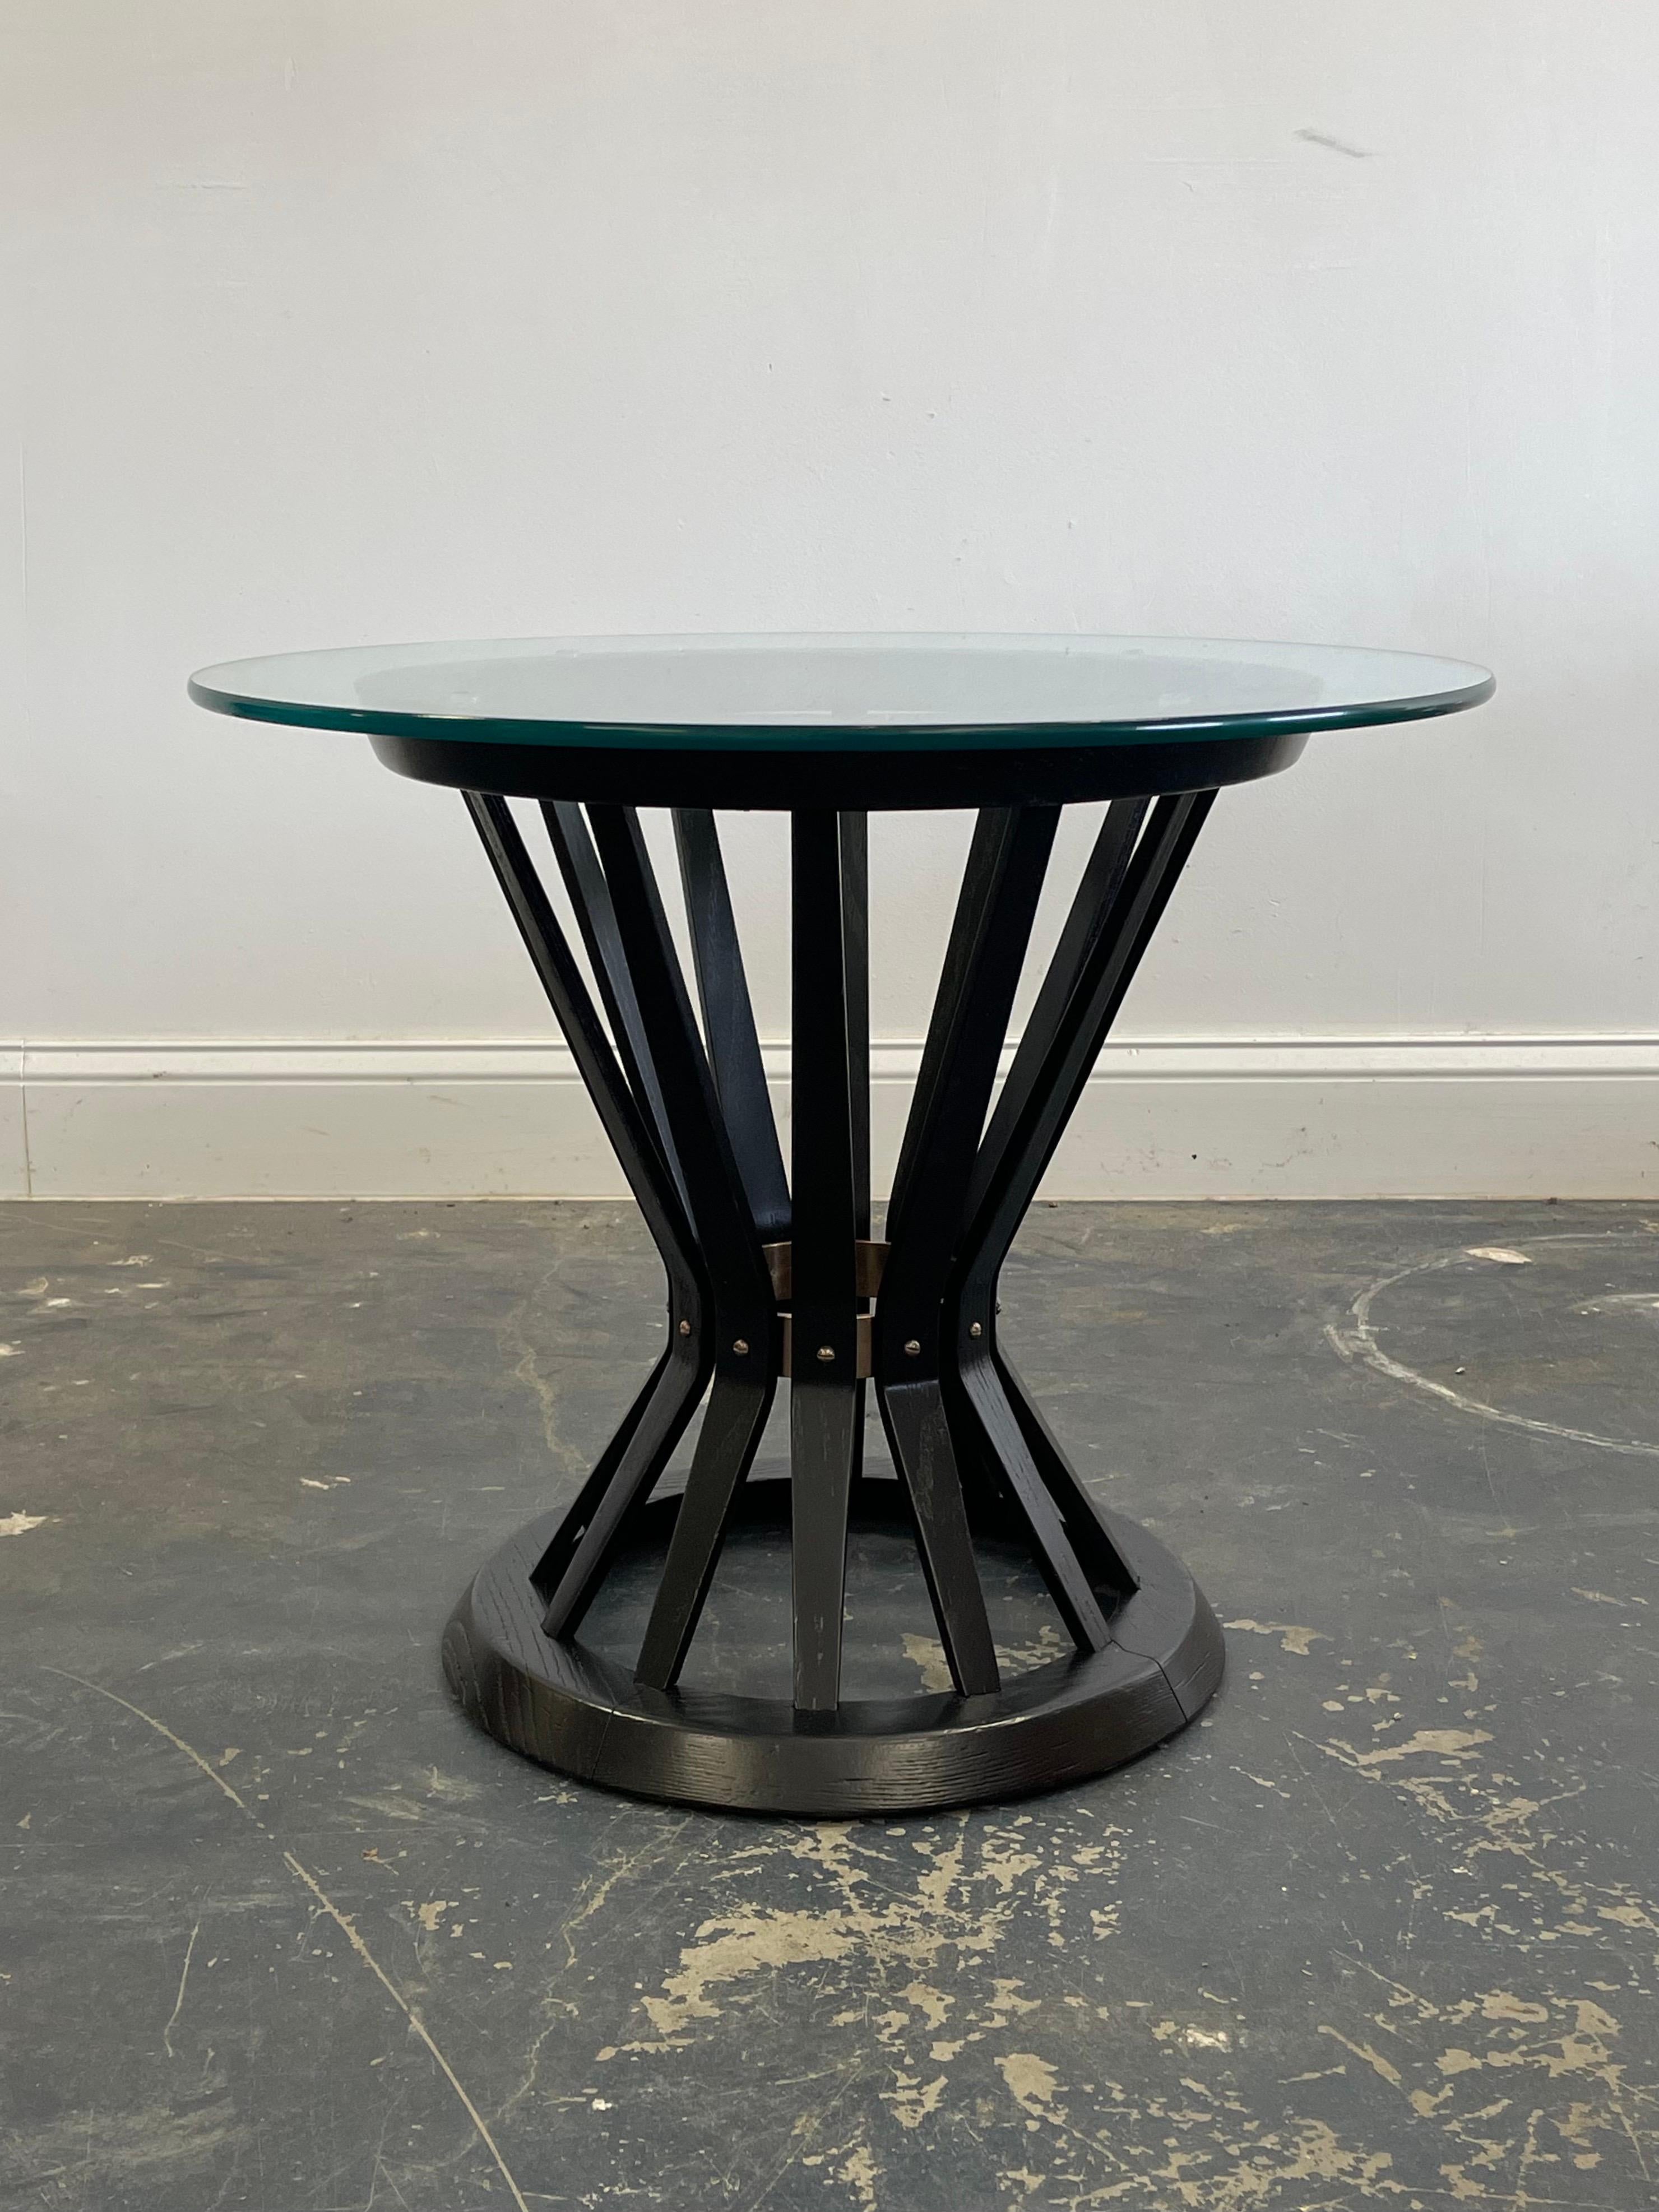 A classic Sheaf of Wheat Table Designed by Edward Wormley for Dunbar. TAble has been freshly ebonized. Brass ring and hardware gently cleaned. Replacement glass top is 3/8” thick

Would work well with other designers from the period such as T.H.